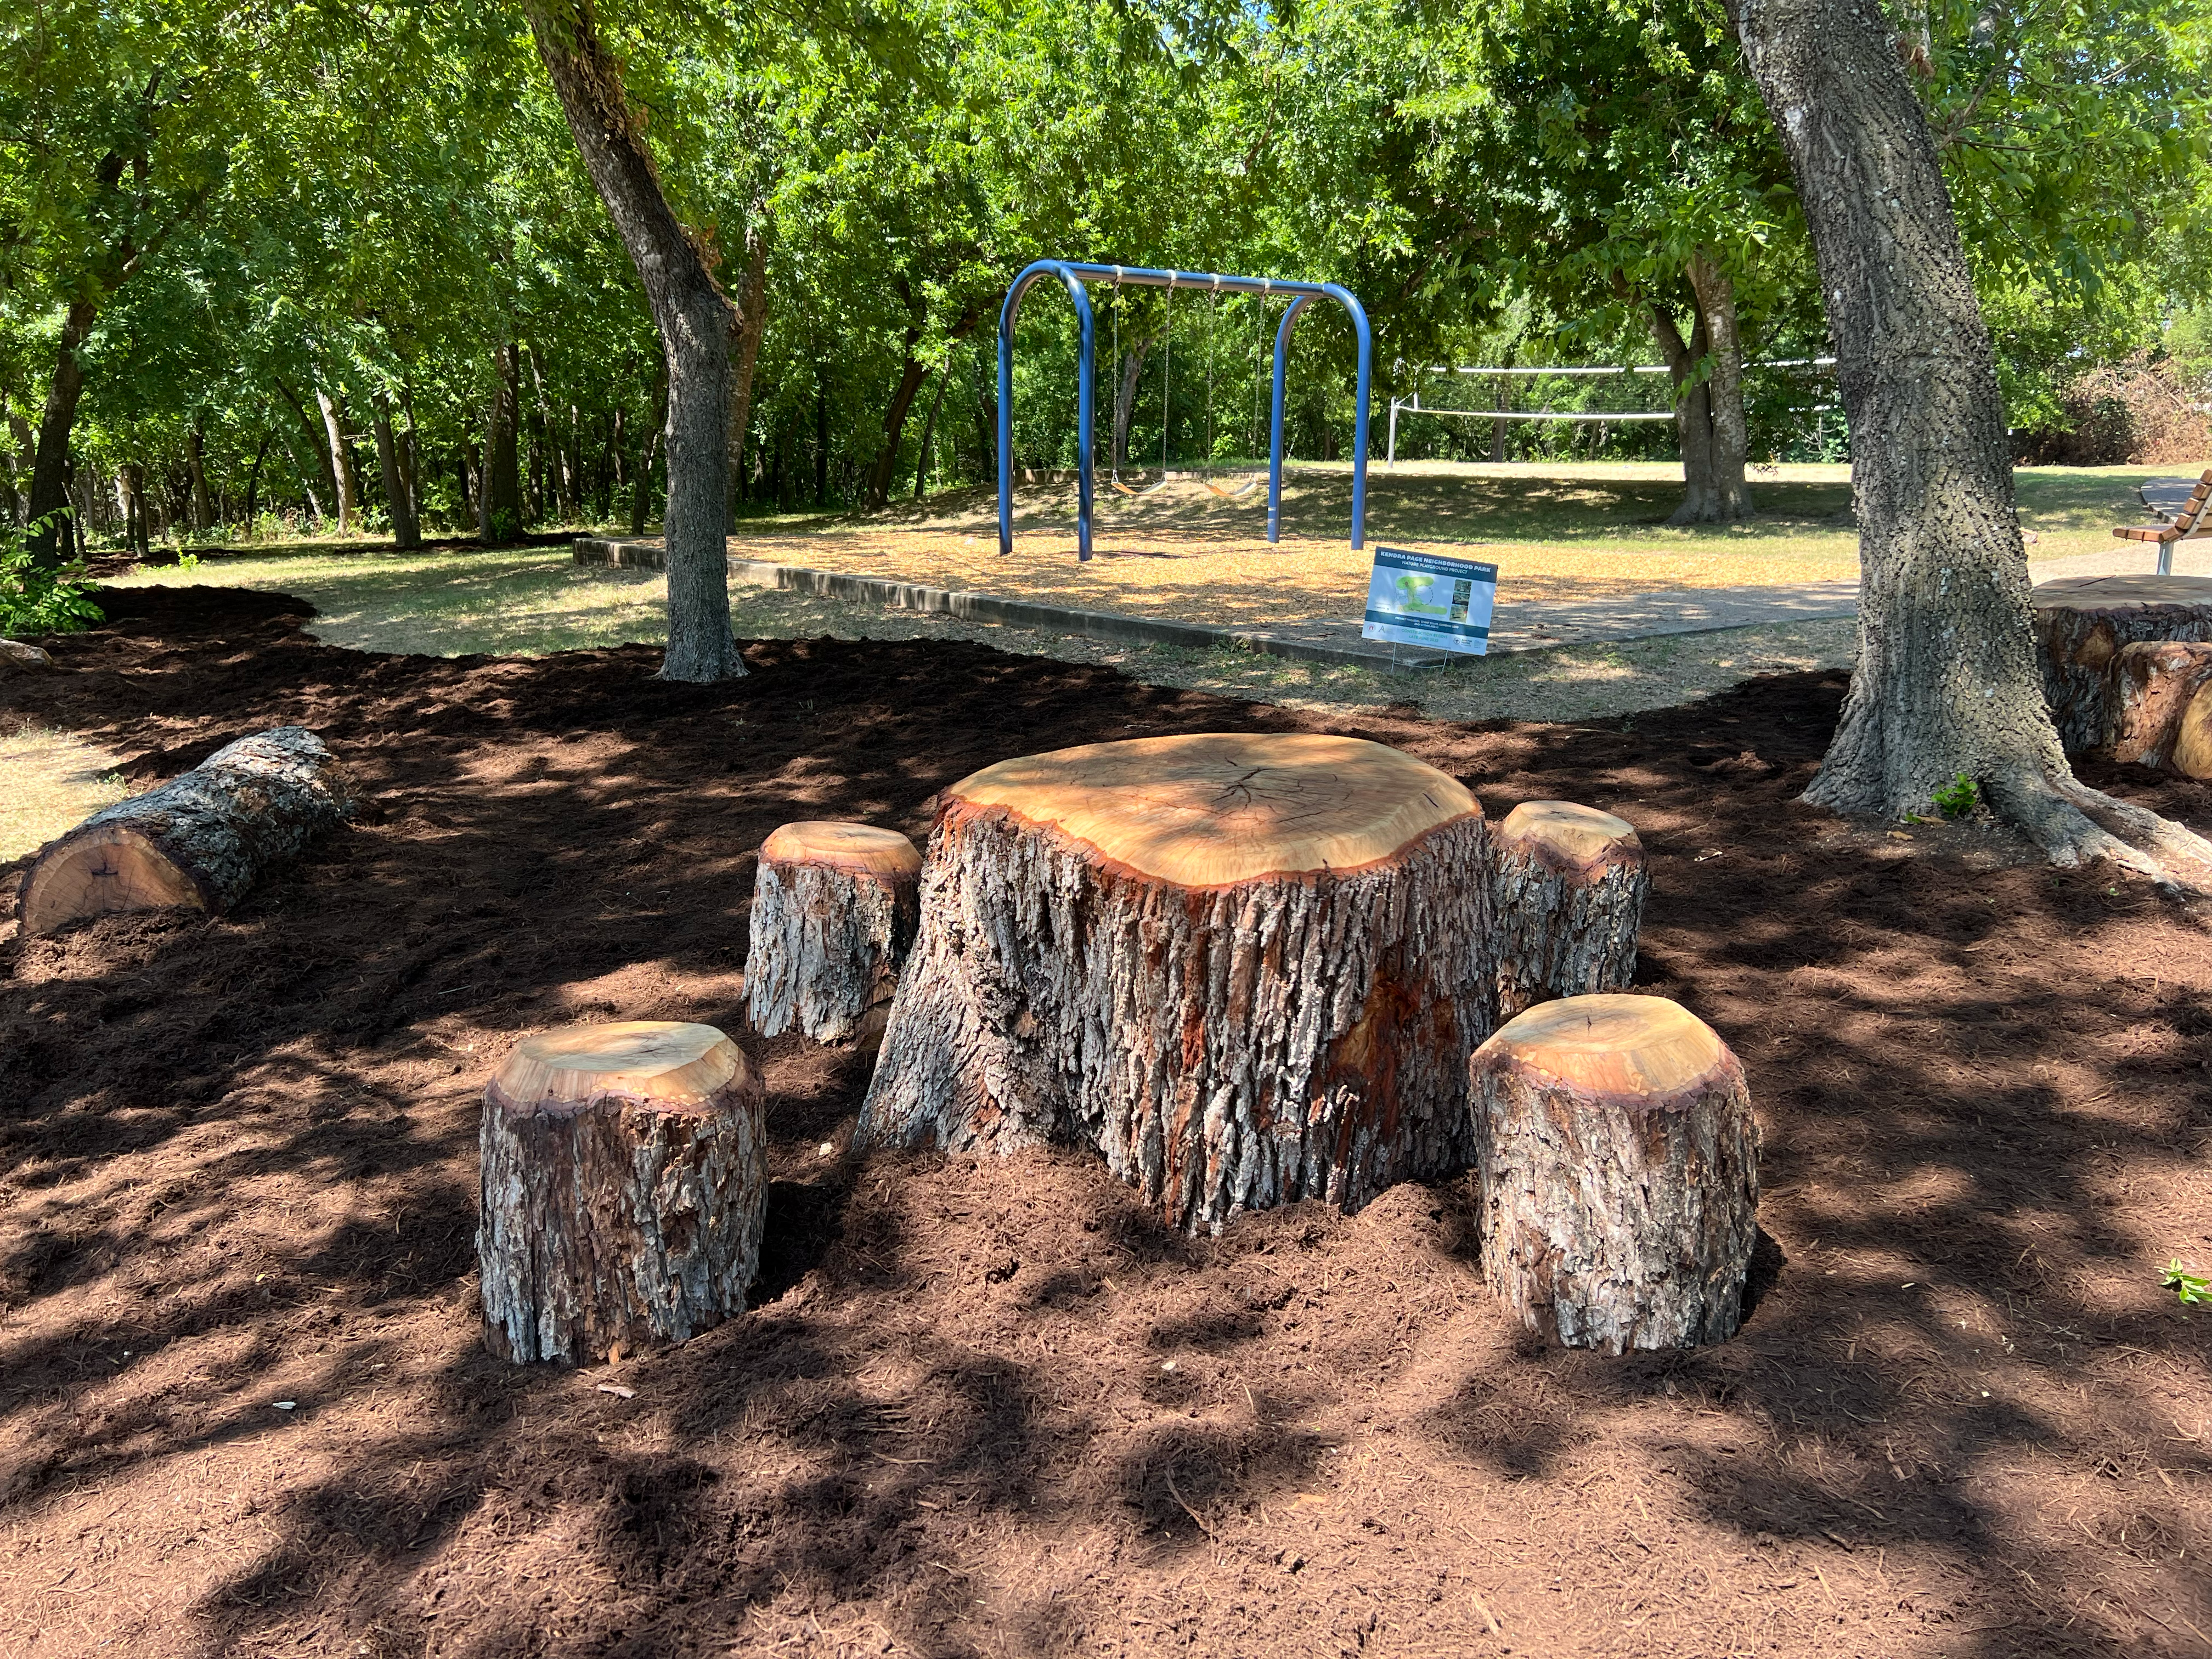 Large stumps for park visitors to enjoy sit just in front of the swing set